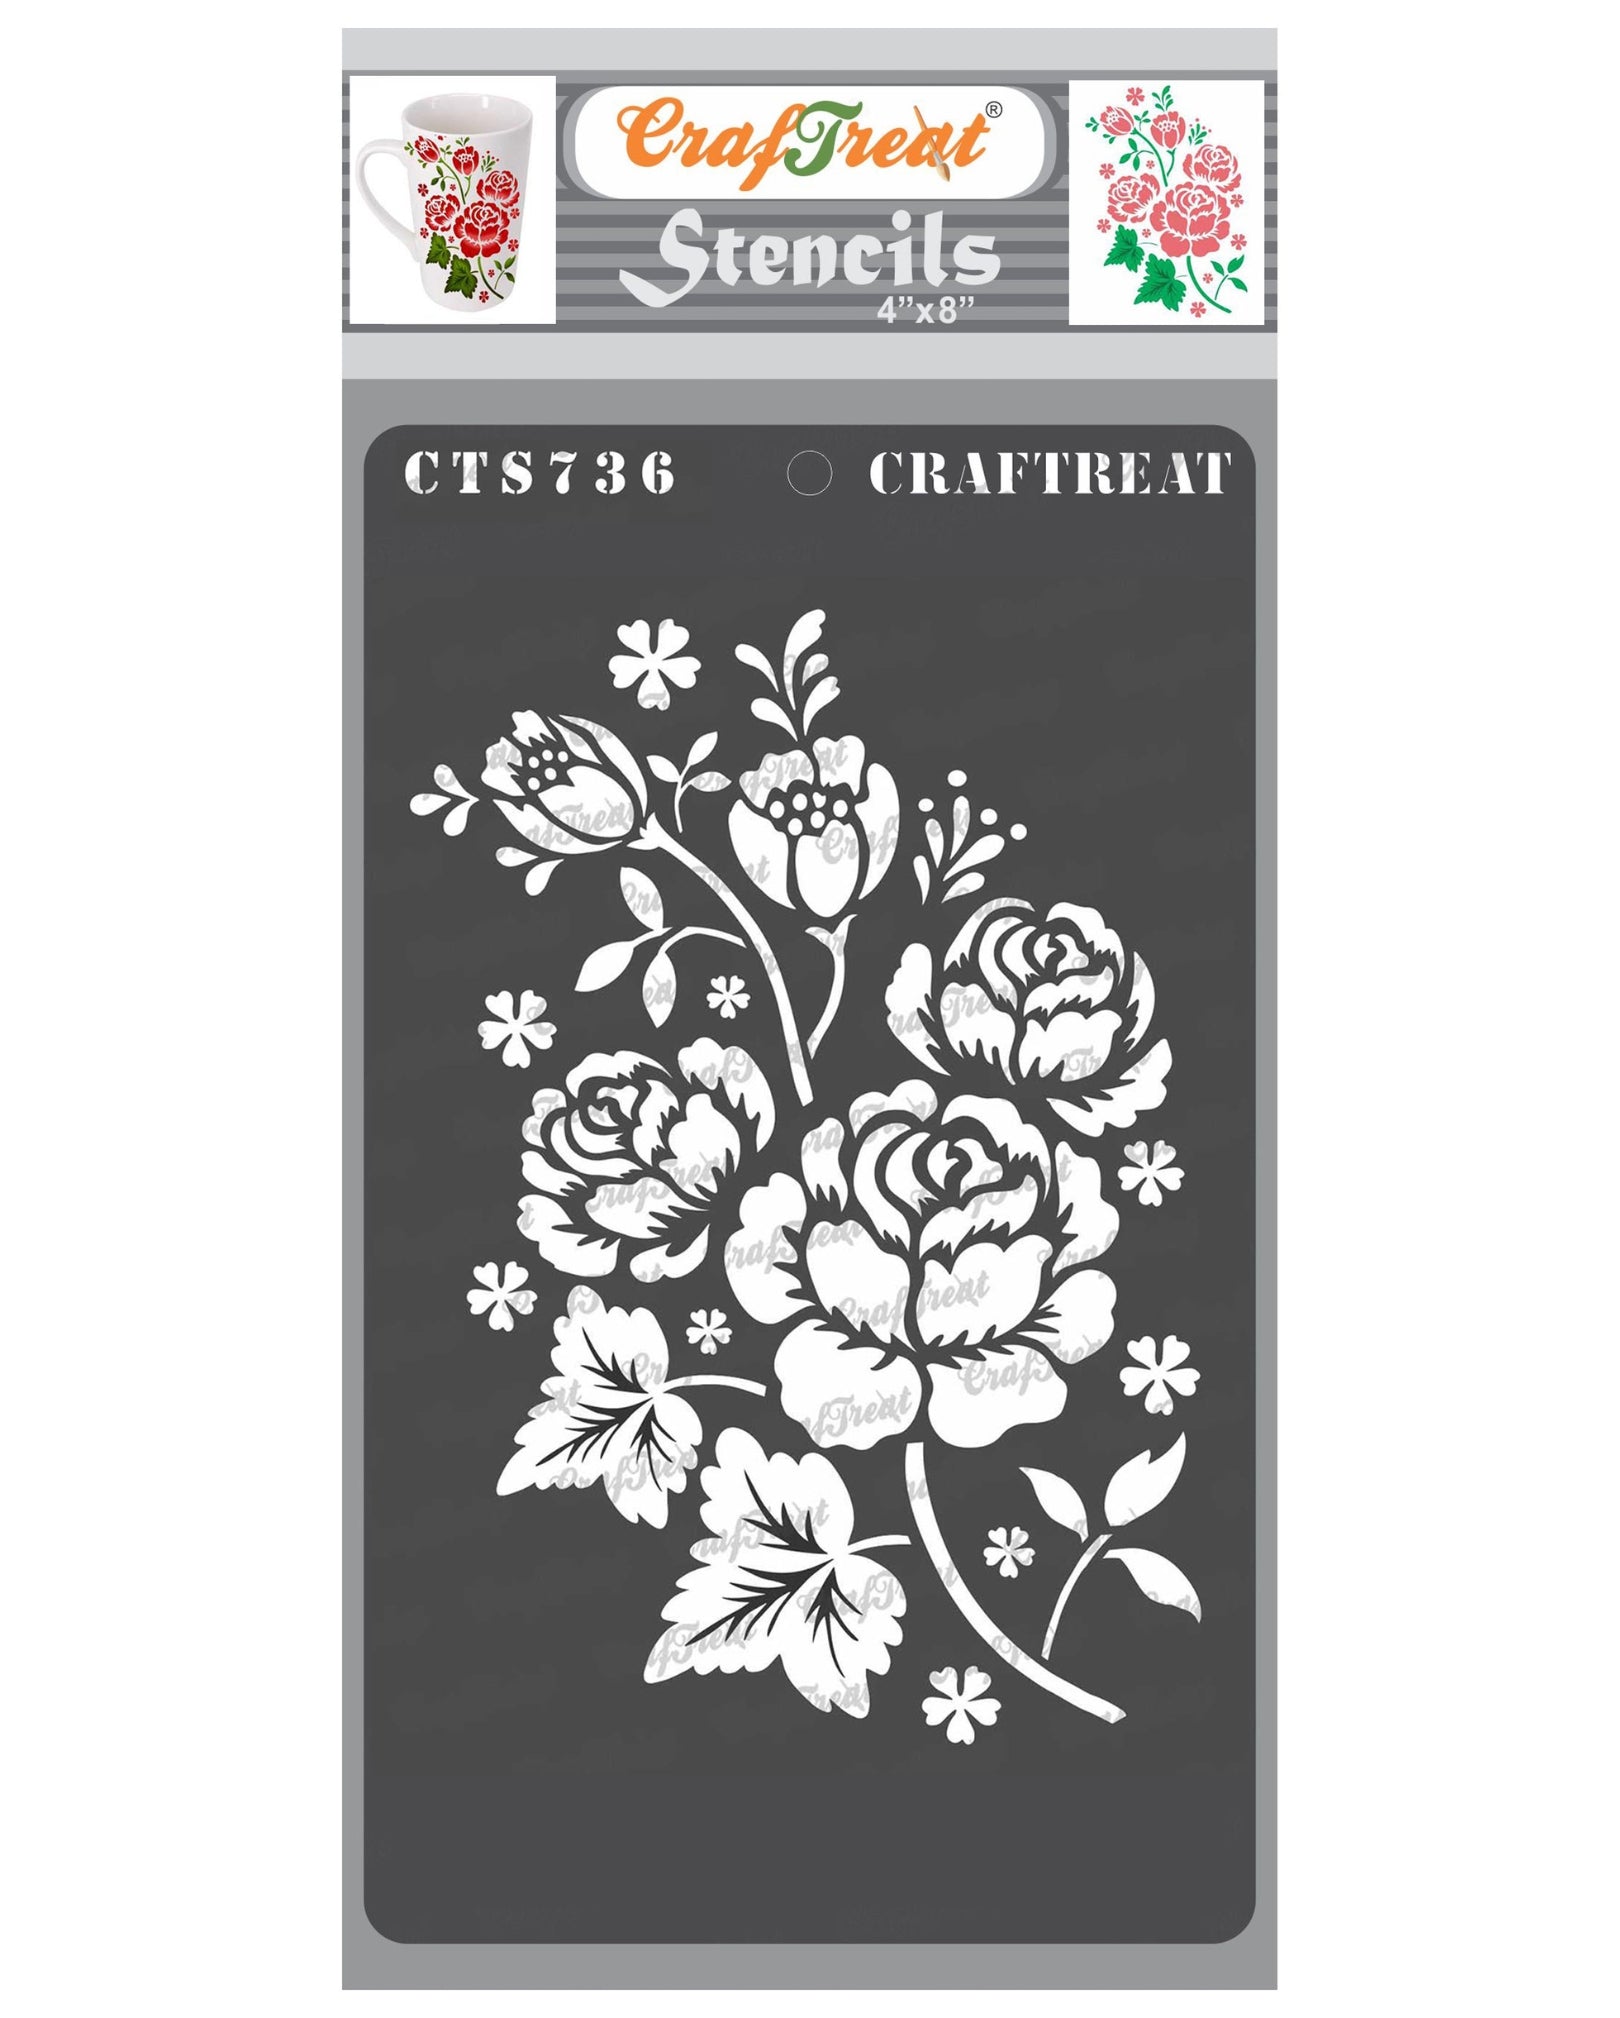 CrafTreat Rose Stencils for Painting on Wood, Canvas, Paper, Fabric, Floor, Wall and Tile - Bouquet of Roses - Size: A4 - Reusable DIY Art and Craft